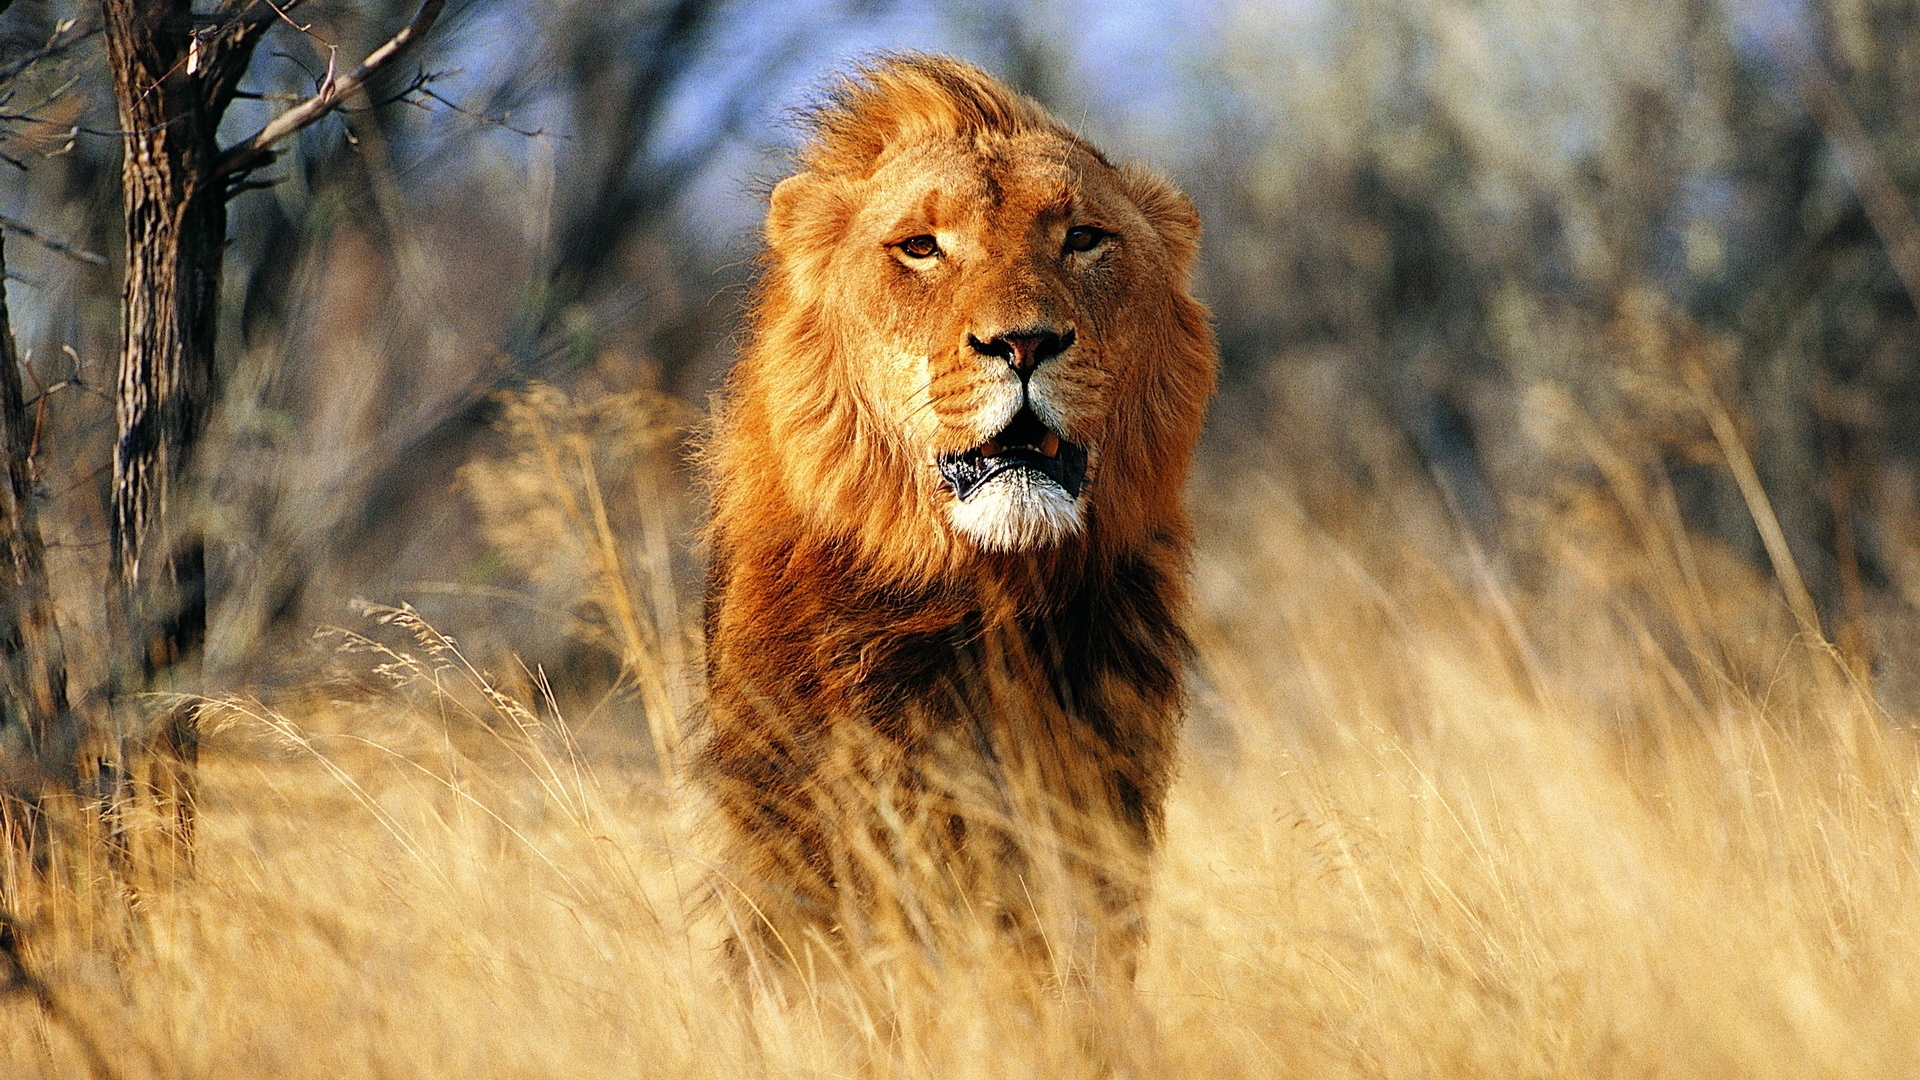 Wallpaper Lion, Wind, Prairie - 1080p Angry Lion Images Hd - HD Wallpaper 